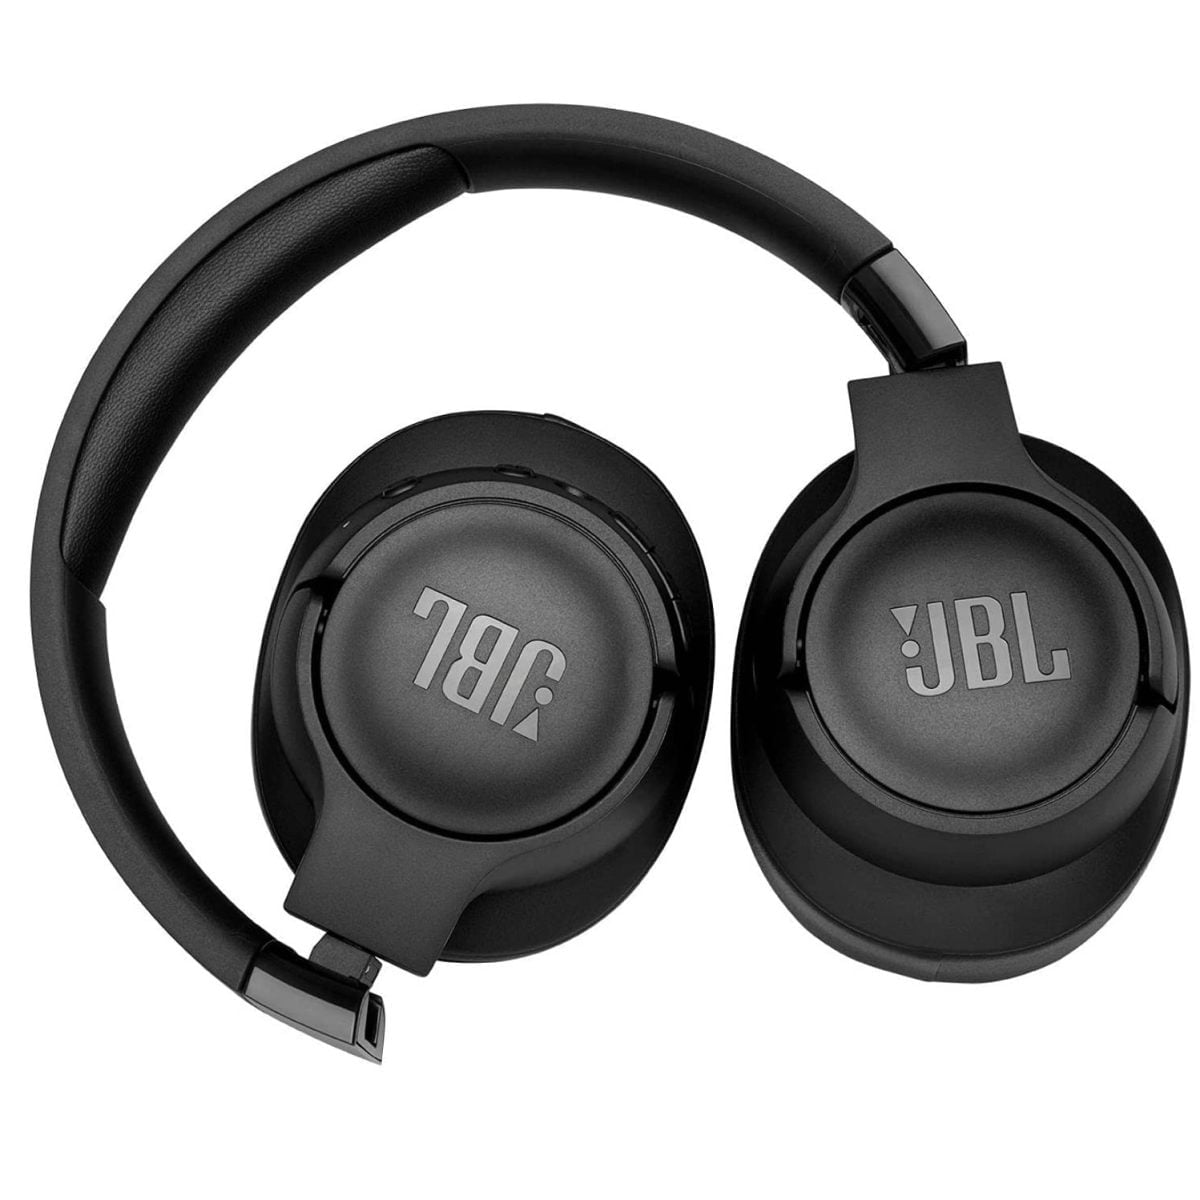 71Bubtbubrl. Ac Sl1500 Jbl &Lt;H1&Gt;Jbl Tune 750Btnc Wireless Noise Cancelling Headphones - Black&Lt;/H1&Gt; Https://Www.youtube.com/Watch?V=3Nvhiwevpho Jbl Tune 750Btnc Wireless Headphones Feature Powerful Jbl Pure Bass Sound And Active Noise-Cancelling For Punchy Bass And An Immersive Audio Experience. The Lightweight Over-Ear Design Offers Maximum Comfort And Sound Quality While Ready To Travel Everywhere You Go With Its Compact Foldable Competence. Up To 15 Hours Of Battery Life Which Recharge In Only 2 Hours Enables Noise-Free, Wireless Playback. Jbl Wireless Headphones Jbl Tune 750Btnc Wireless Noise Cancelling Headphones - Black